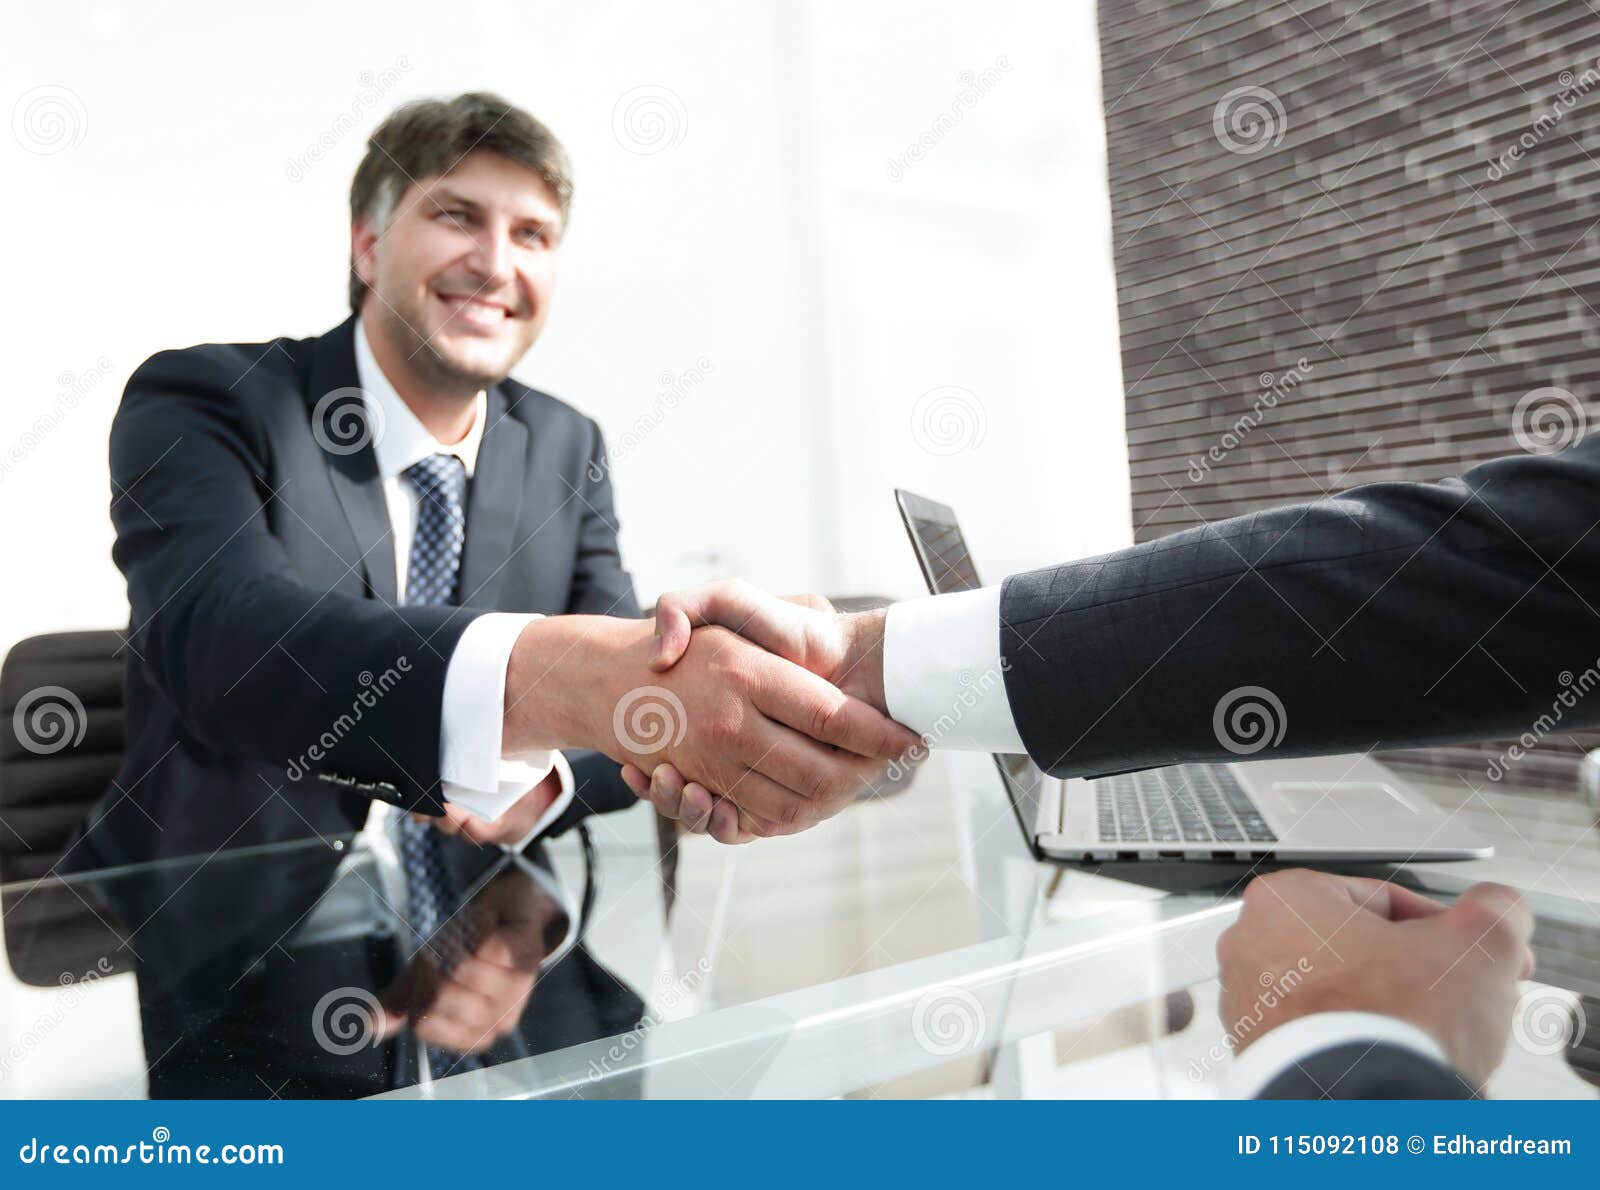 Businessman Stretches Out His Hand For A Handshake Stock Photo Image